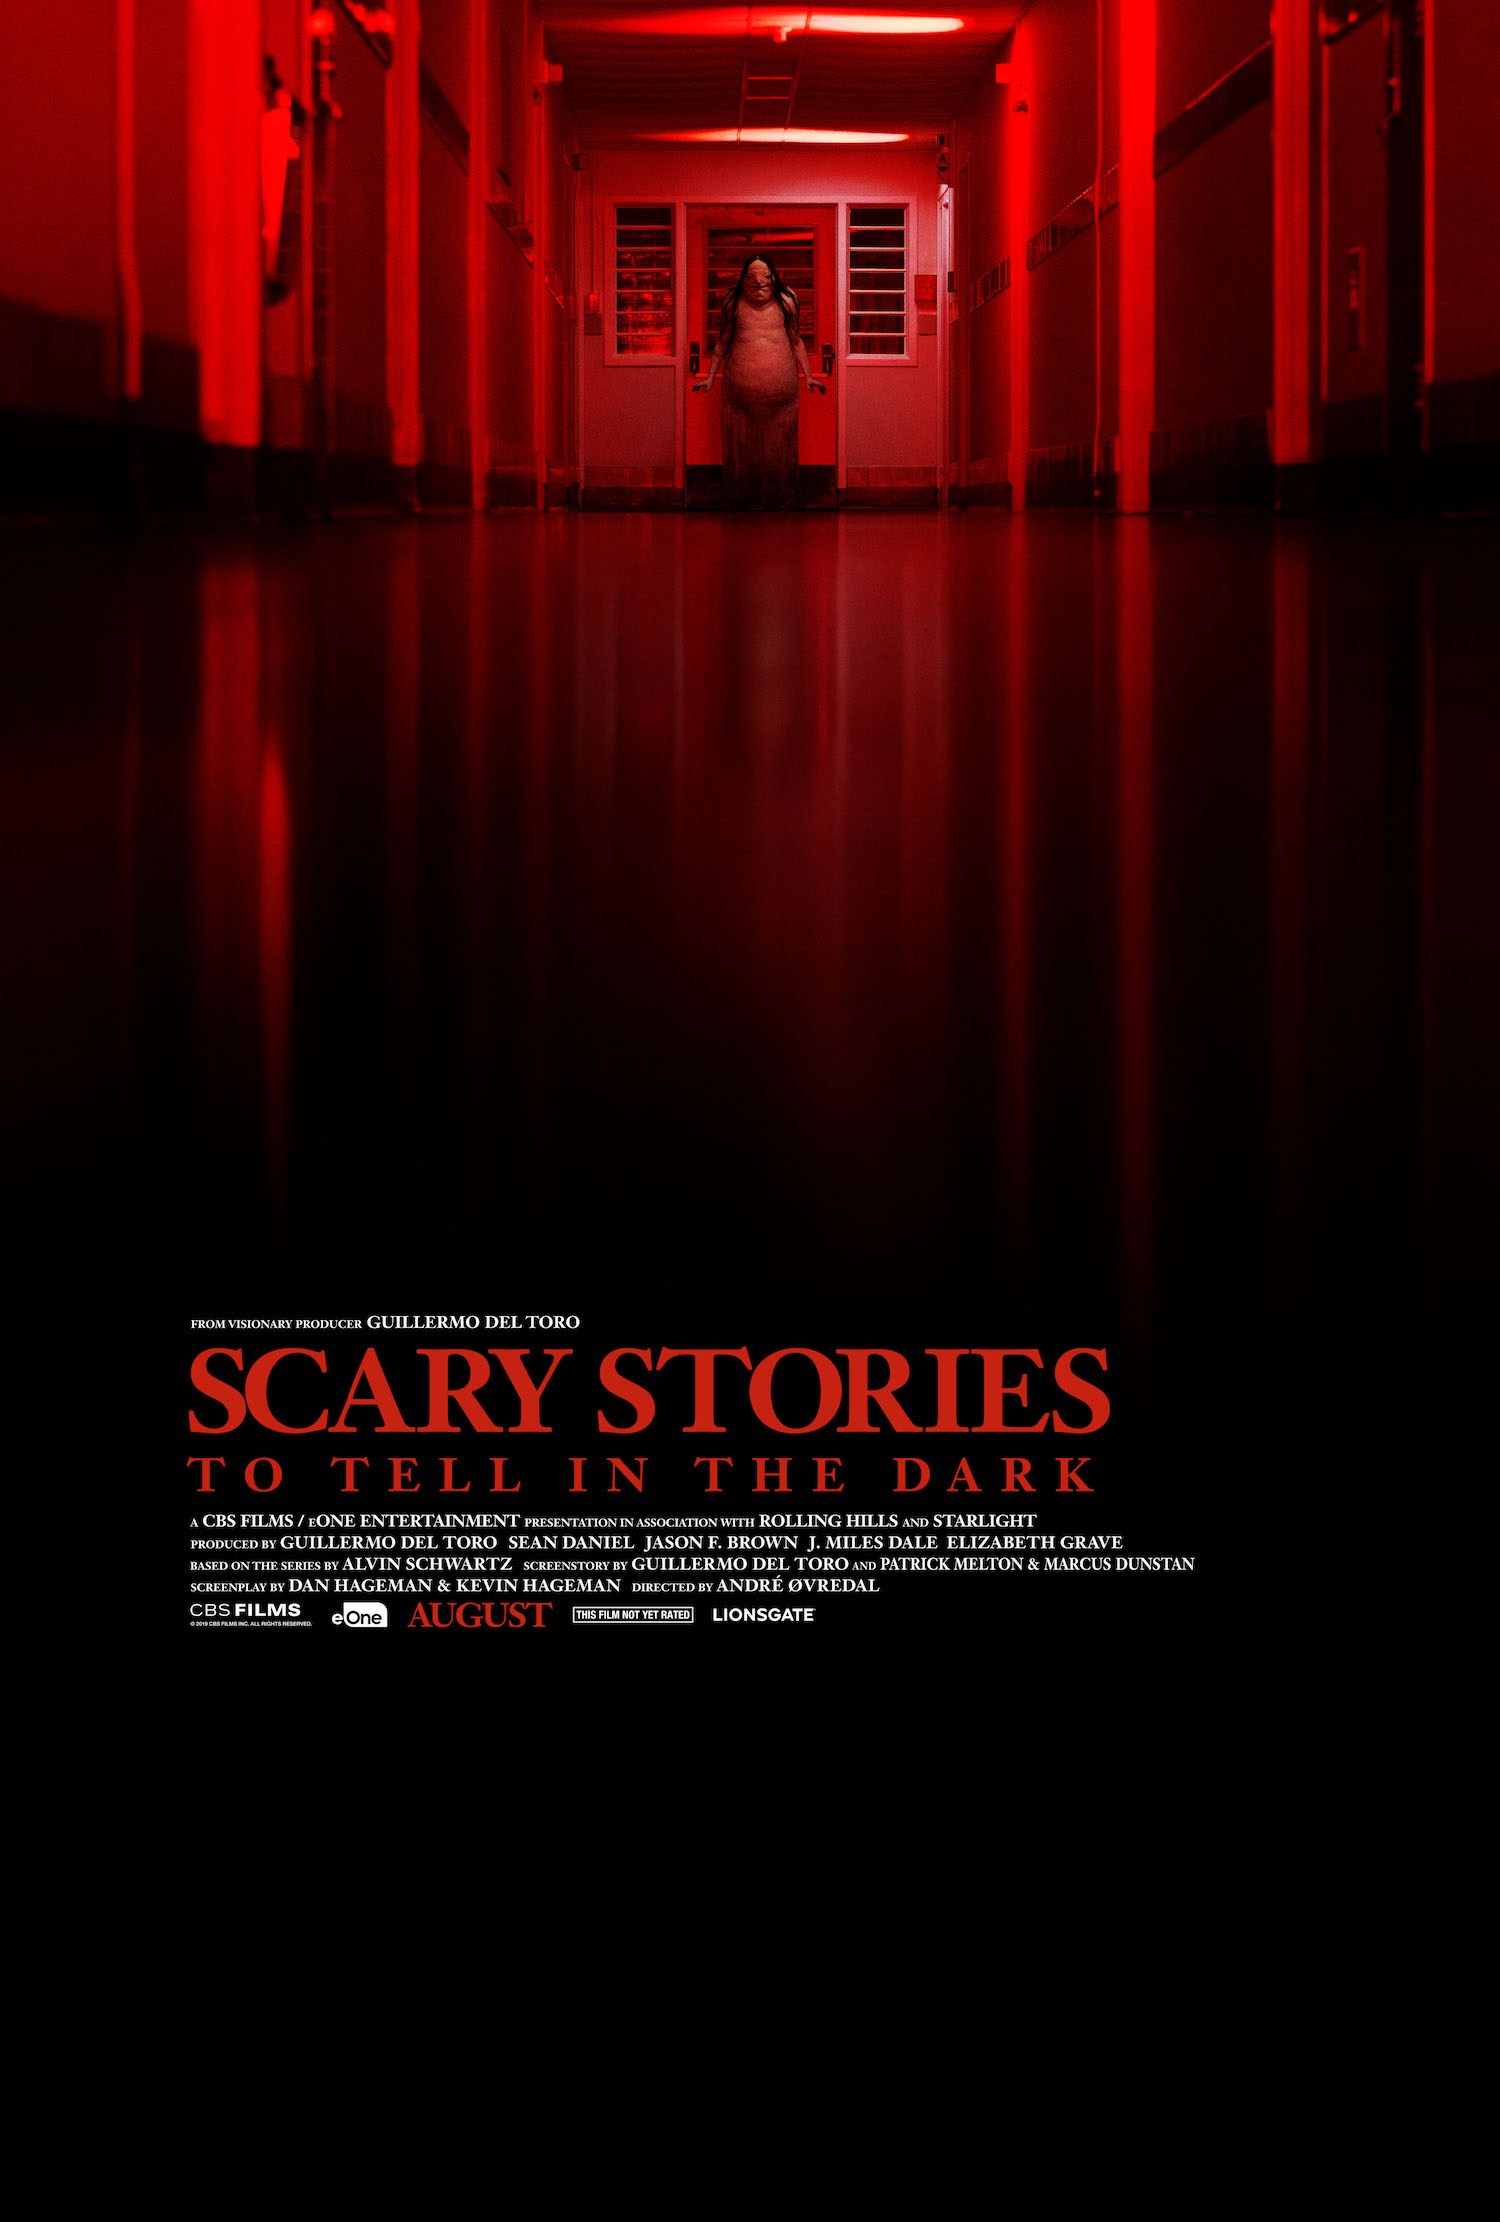 Zobacz trailer do „Scary stories to tell in the dark”.